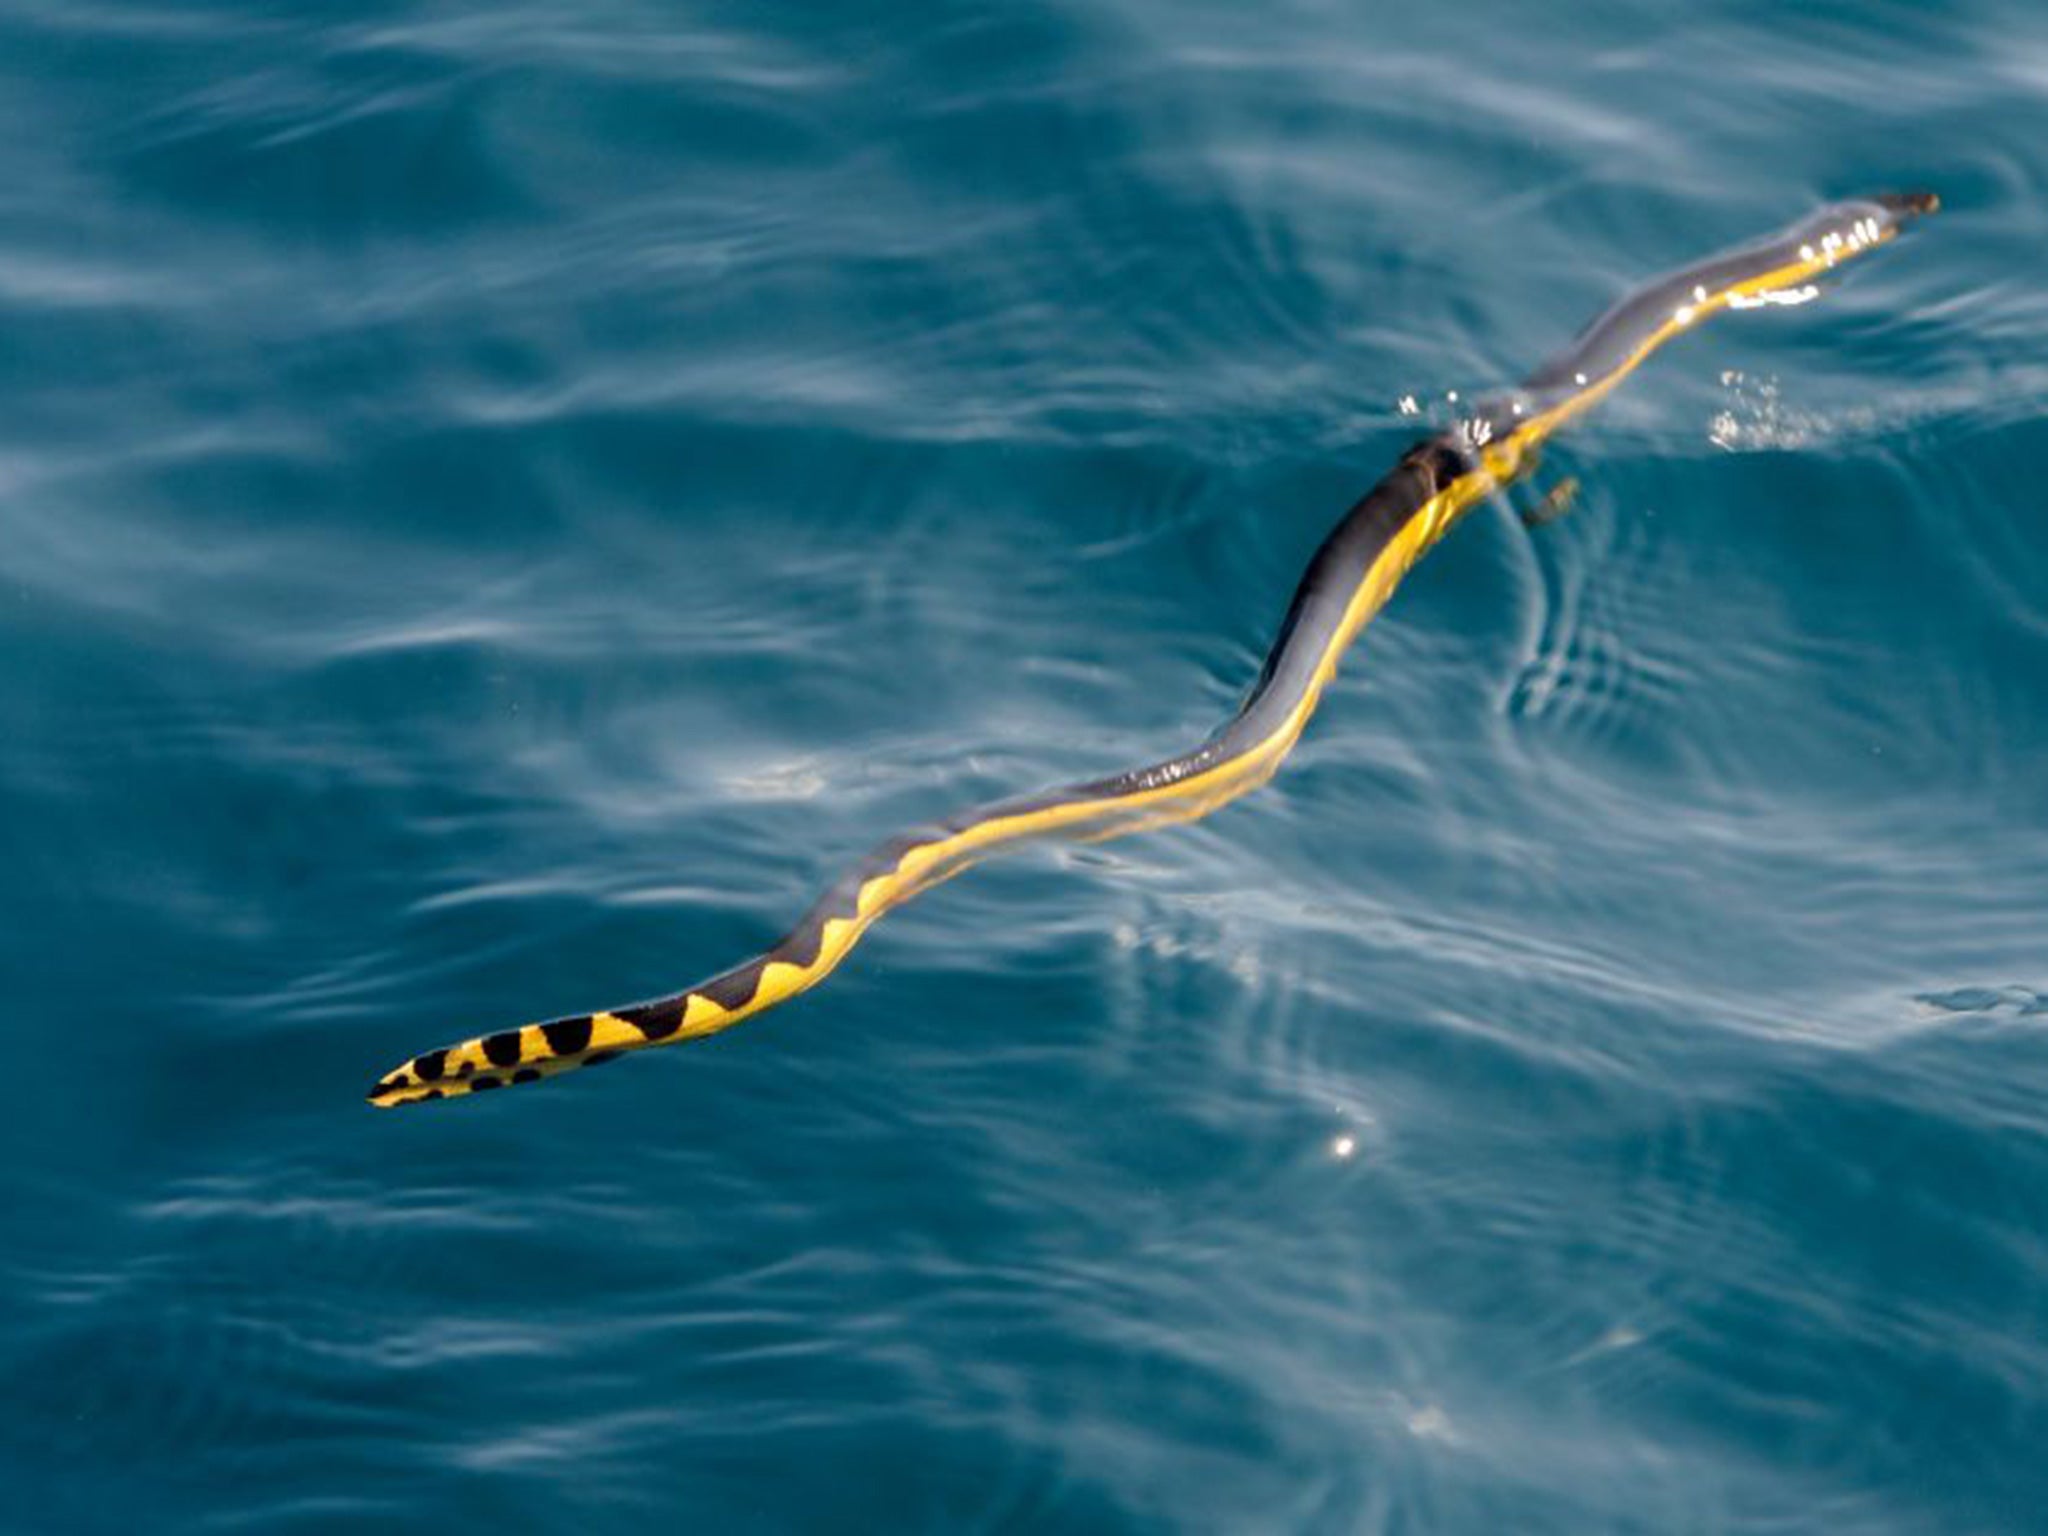 Found in tropical waters, sea snakes grow to between 120cm and 150cm in length